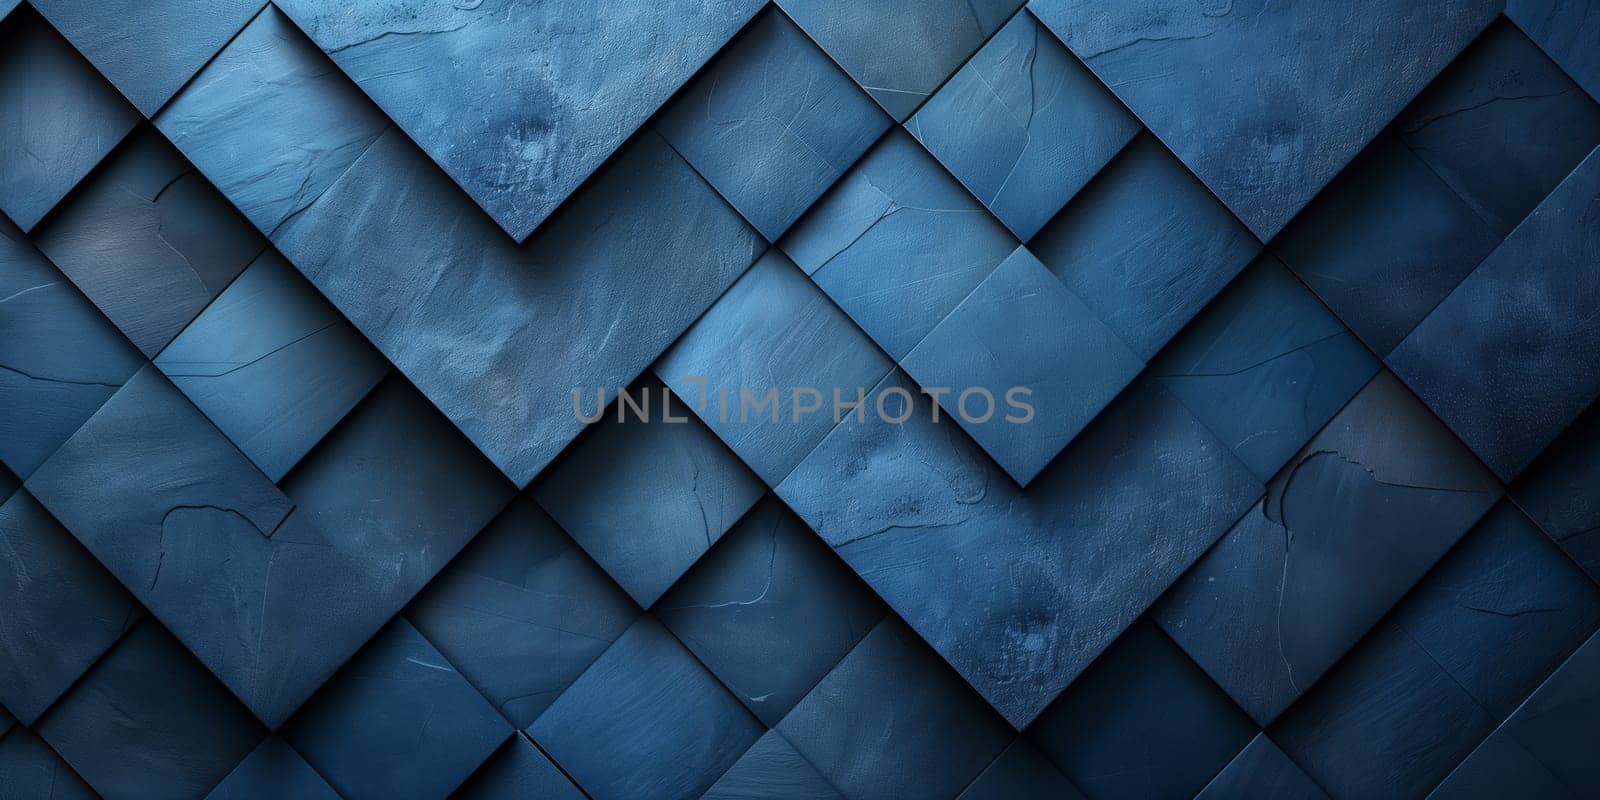 A close up of a diagonal pattern blue tile wall made of composite material, resembling a road surface. The electric blue rectangles create a unique fixture with tints and shades